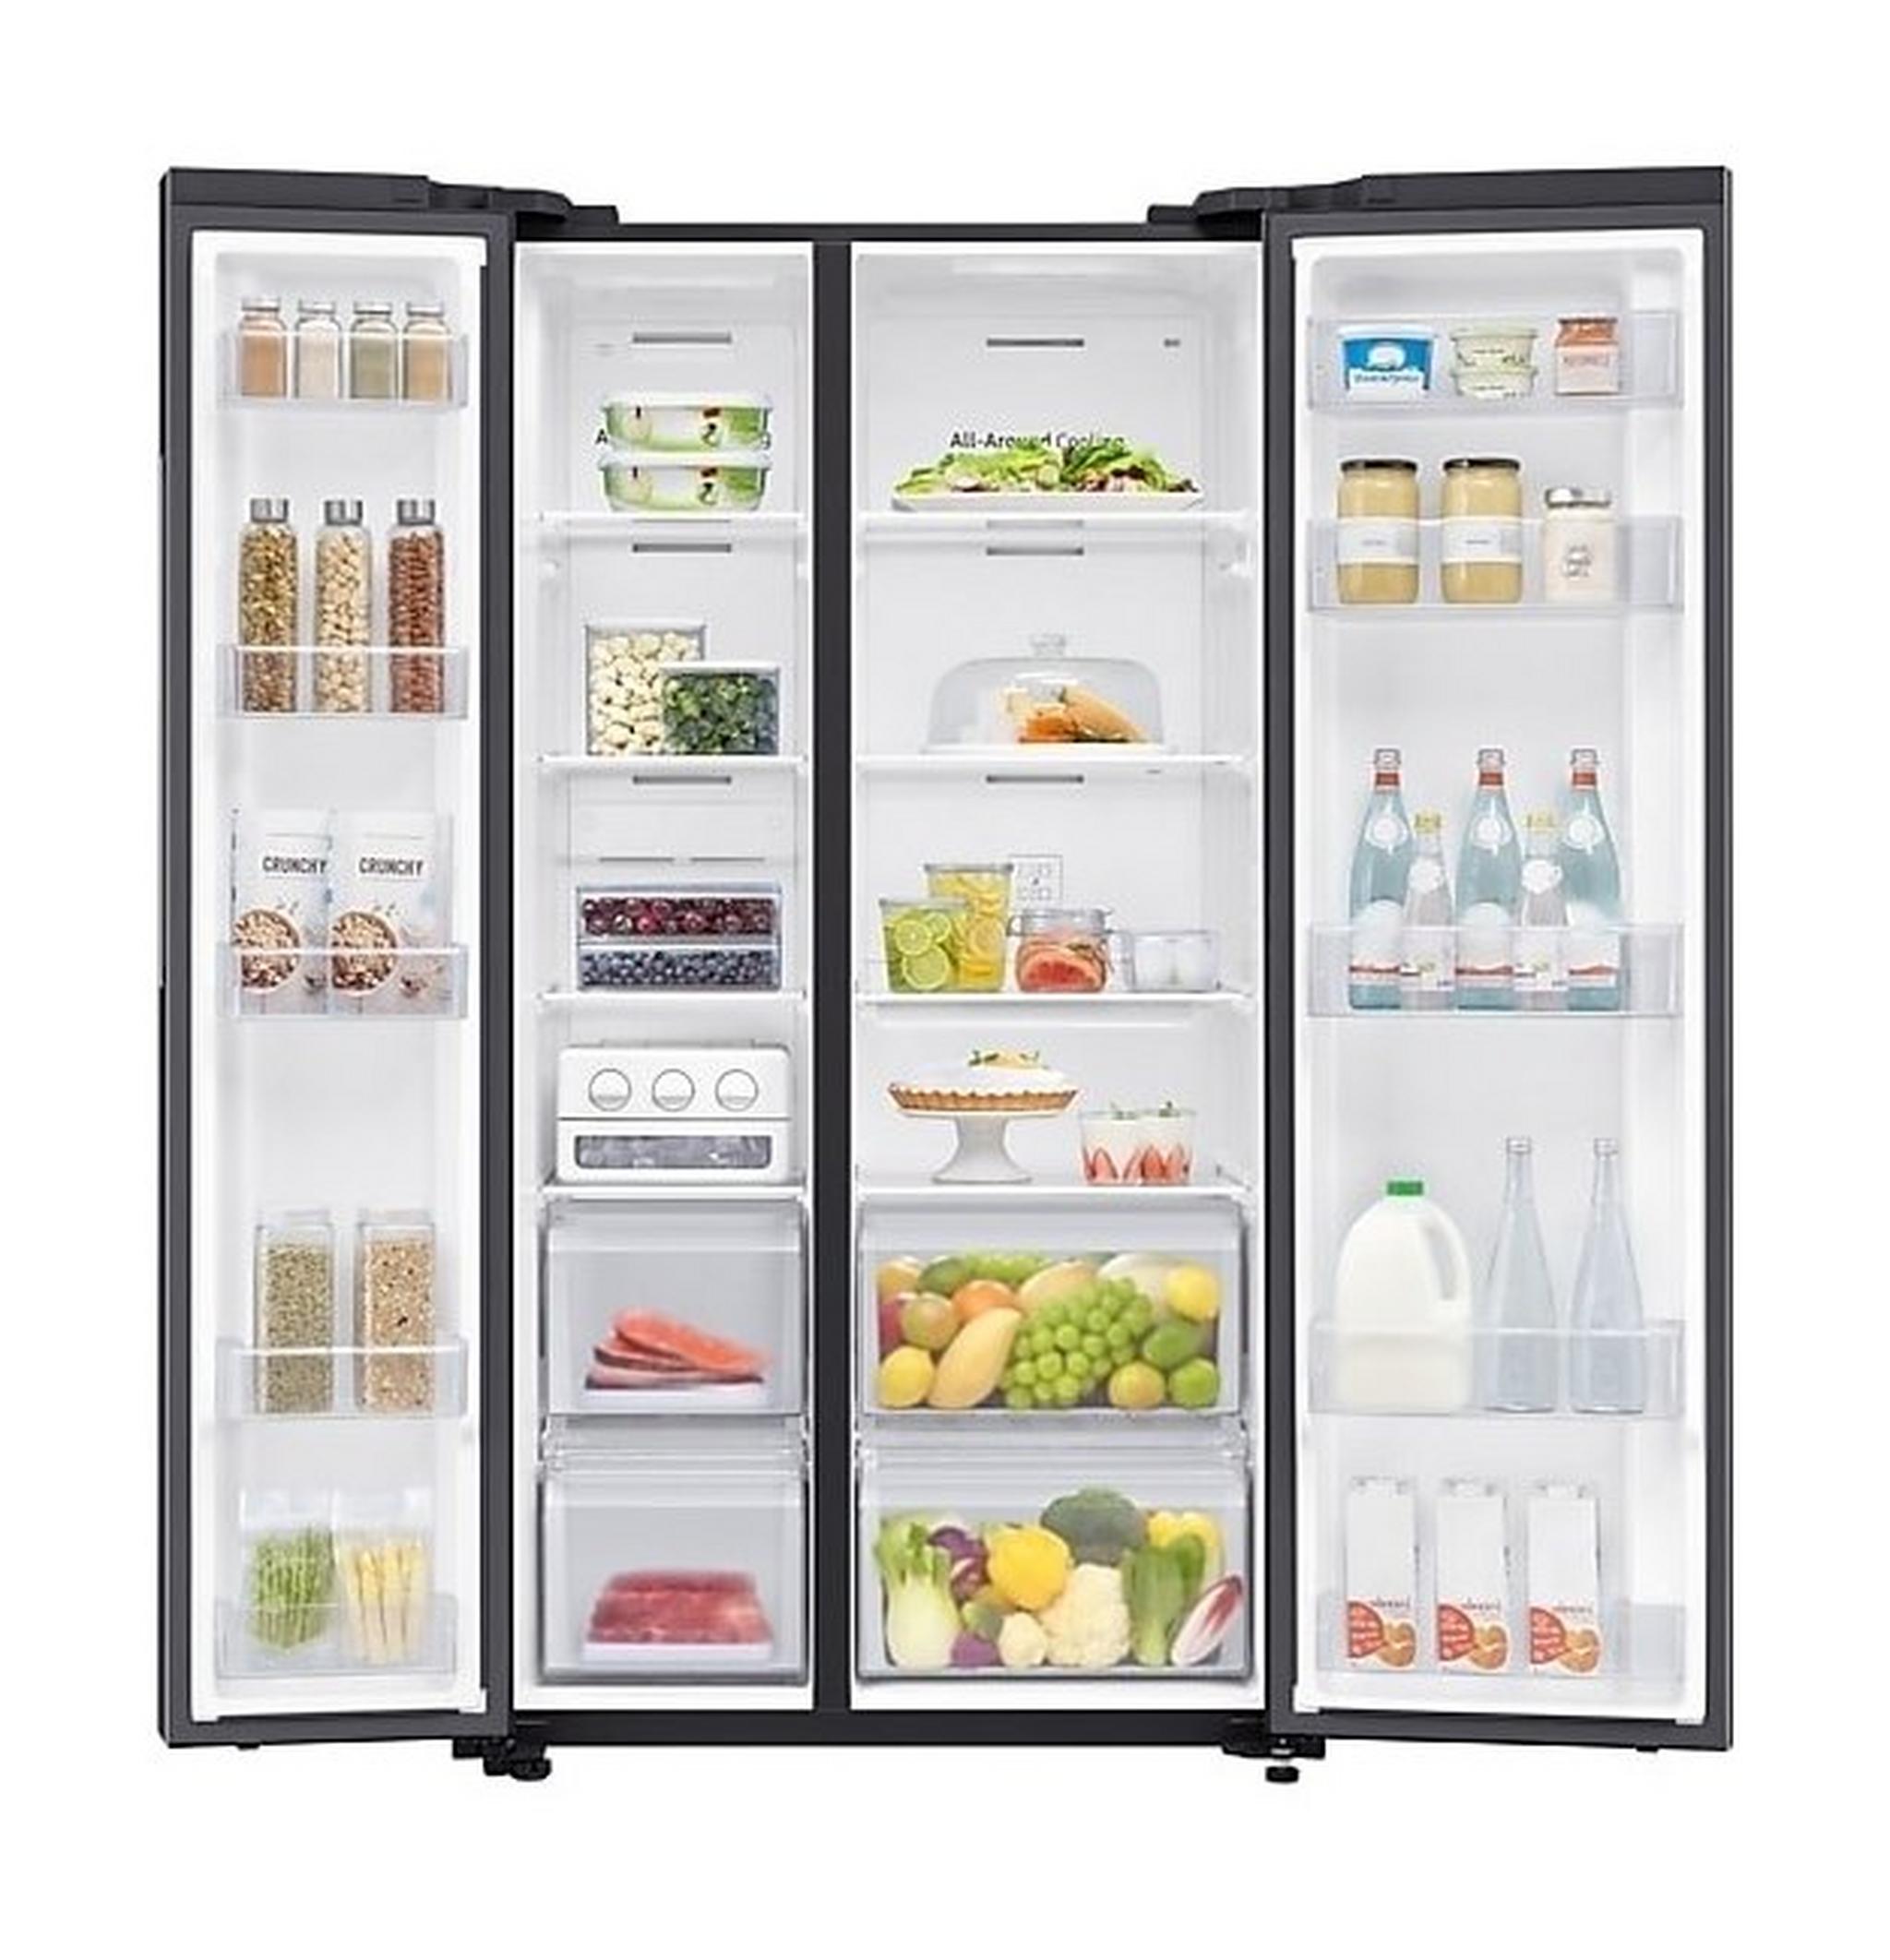 Samsung 23CFT Side By Side Refrigerator and Freezer - RS62R5001B4